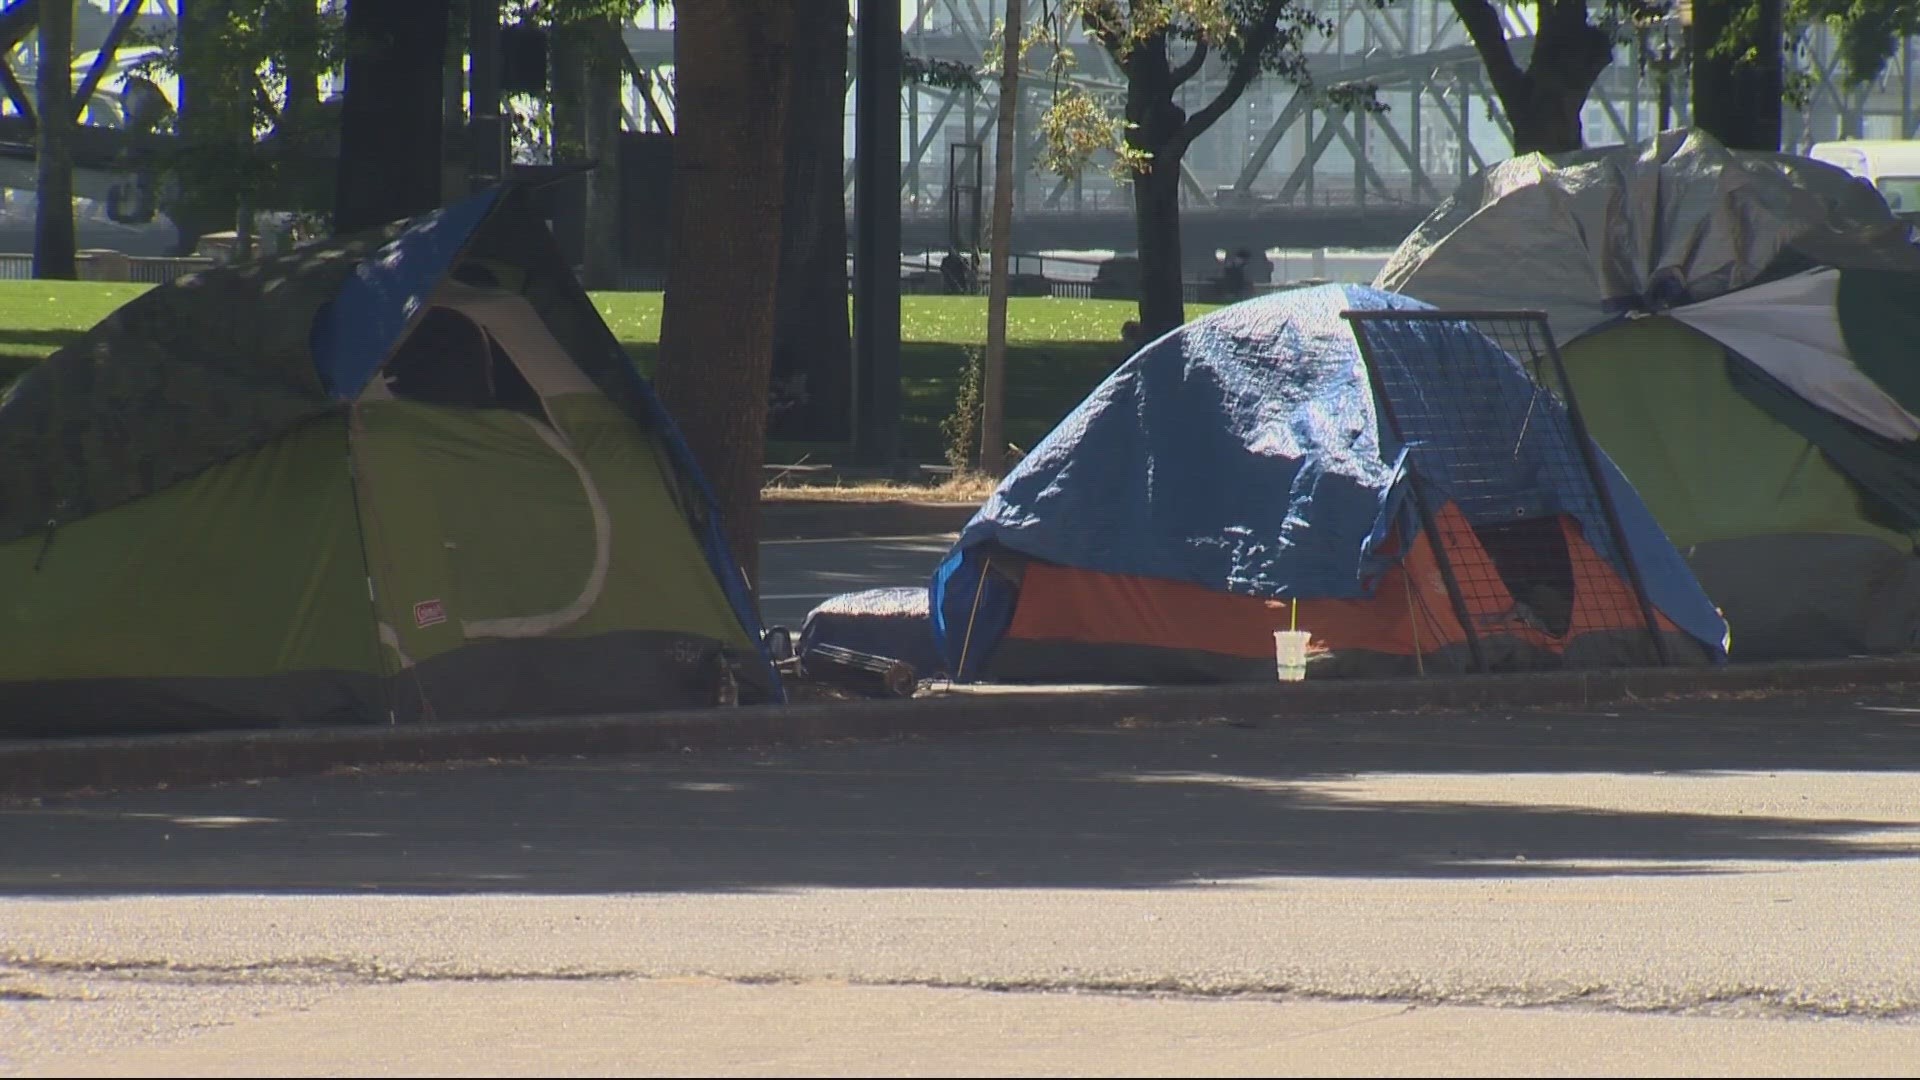 The ban prohibits camping on sidewalk areas for pedestrians, areas near construction sites, schools, daycares, existing shelters, and high crash corridors.